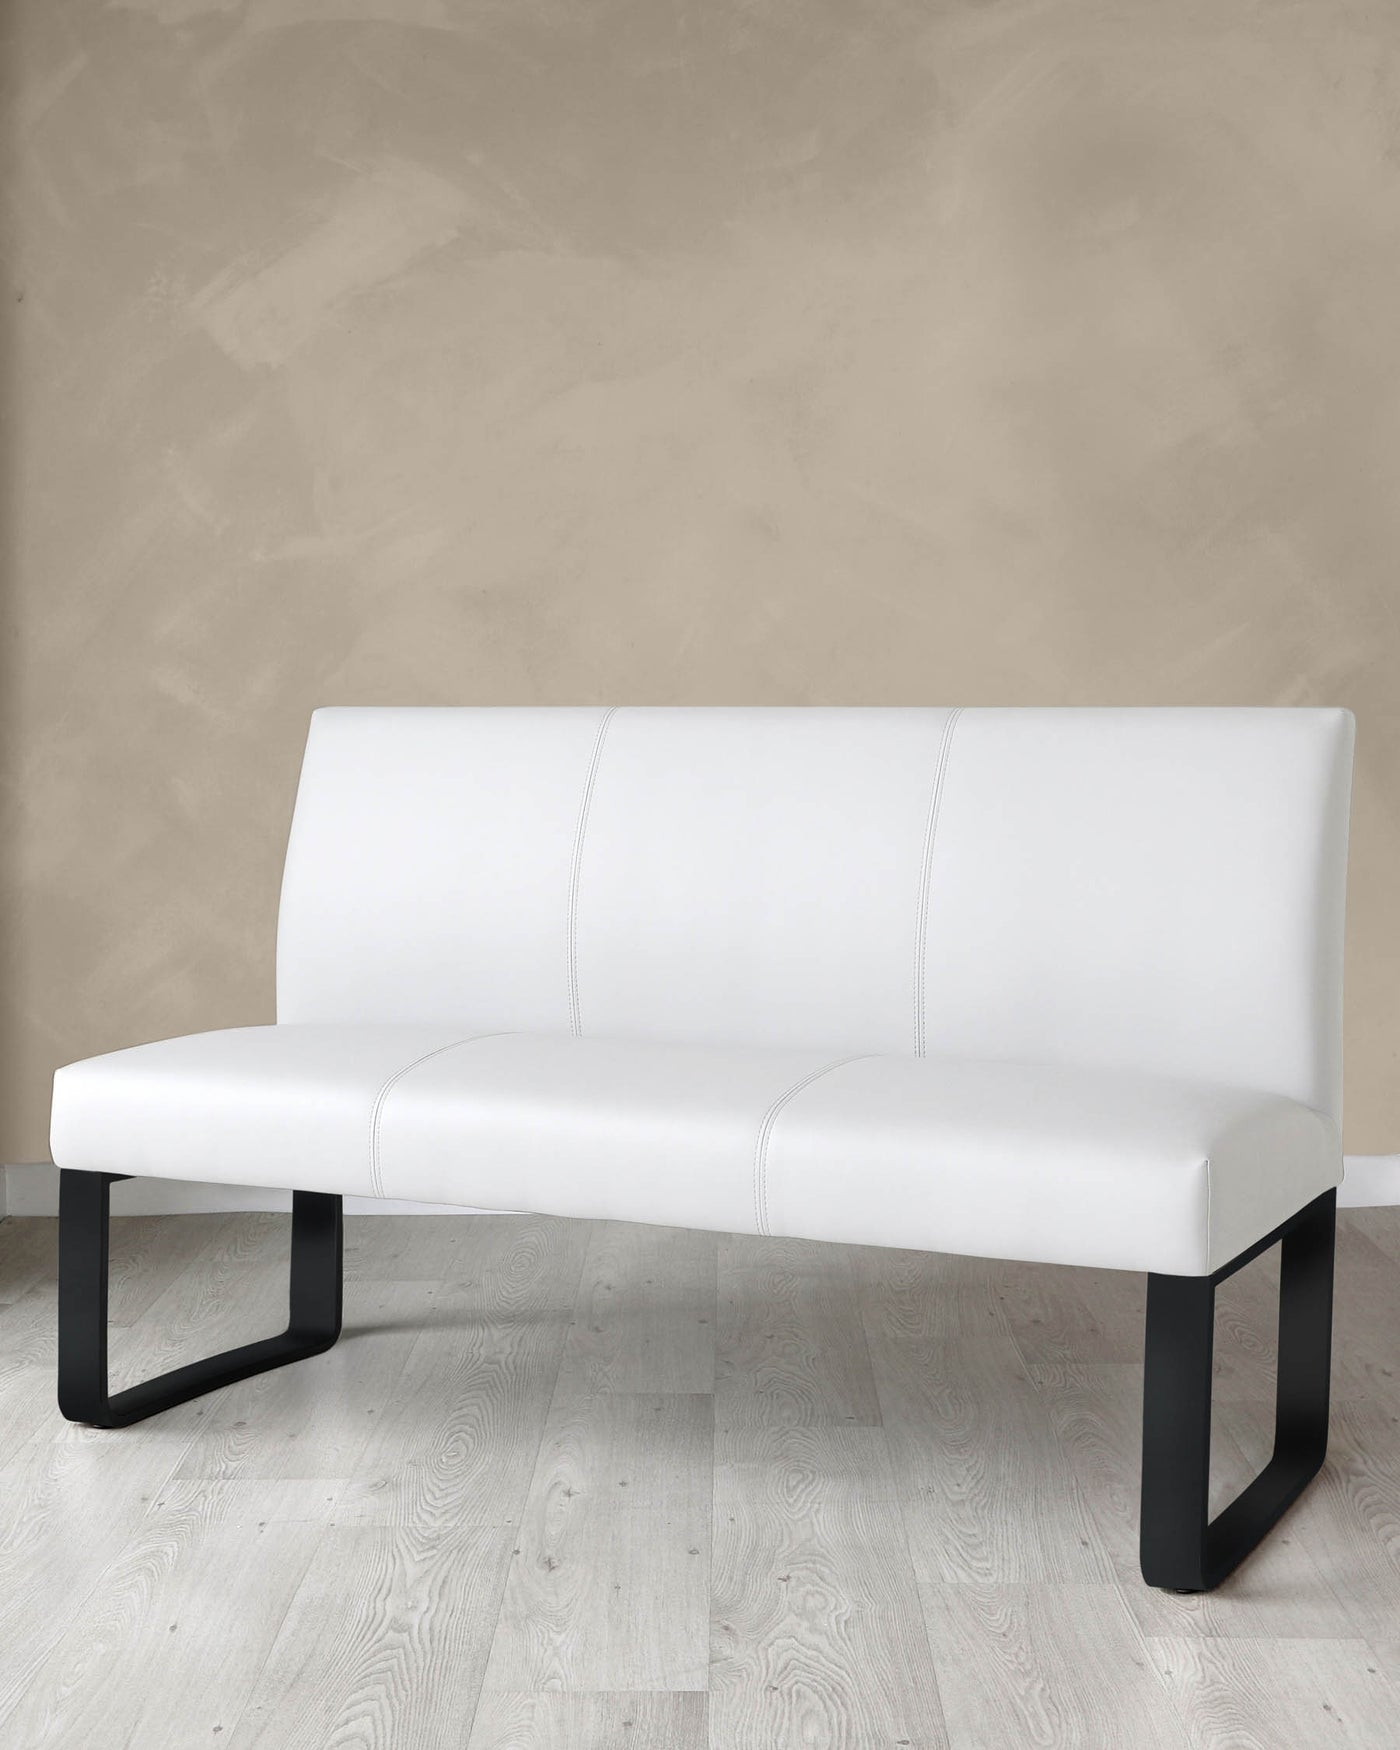 Modern white faux leather bench with a sleek minimalist design, featuring a single elongated cushion with subtle stitched detailing, and sturdy dark metal U-shaped legs, presented against a neutral-toned wall and on a light wooden floor.